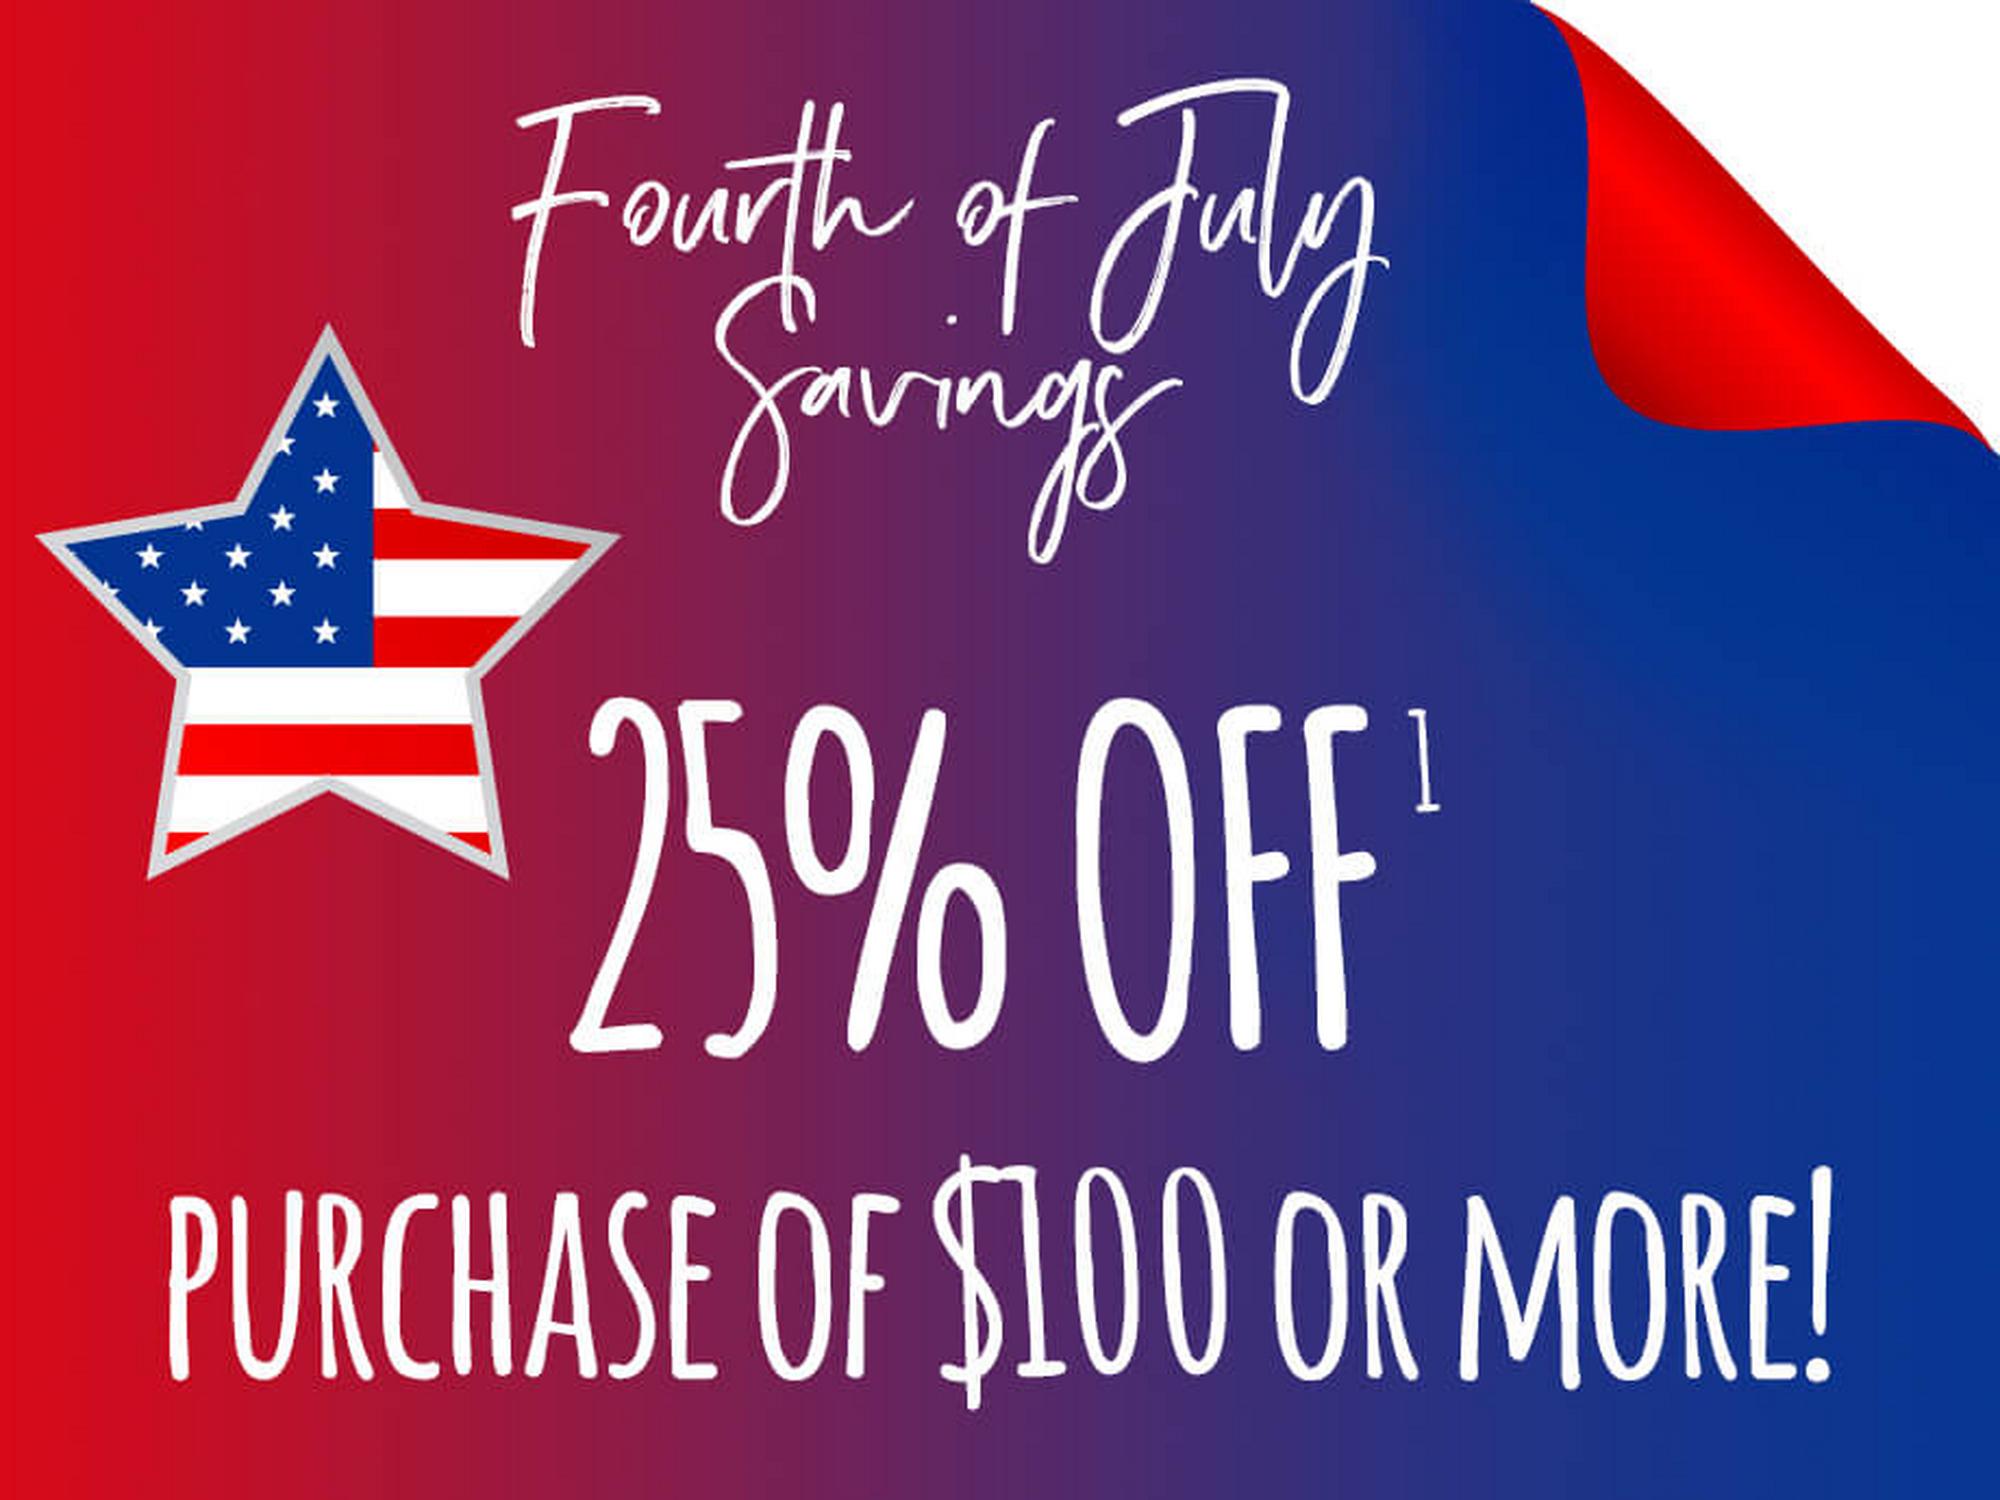 Fourth of July Savings: 25% OFF1 purchase of $100 or more!